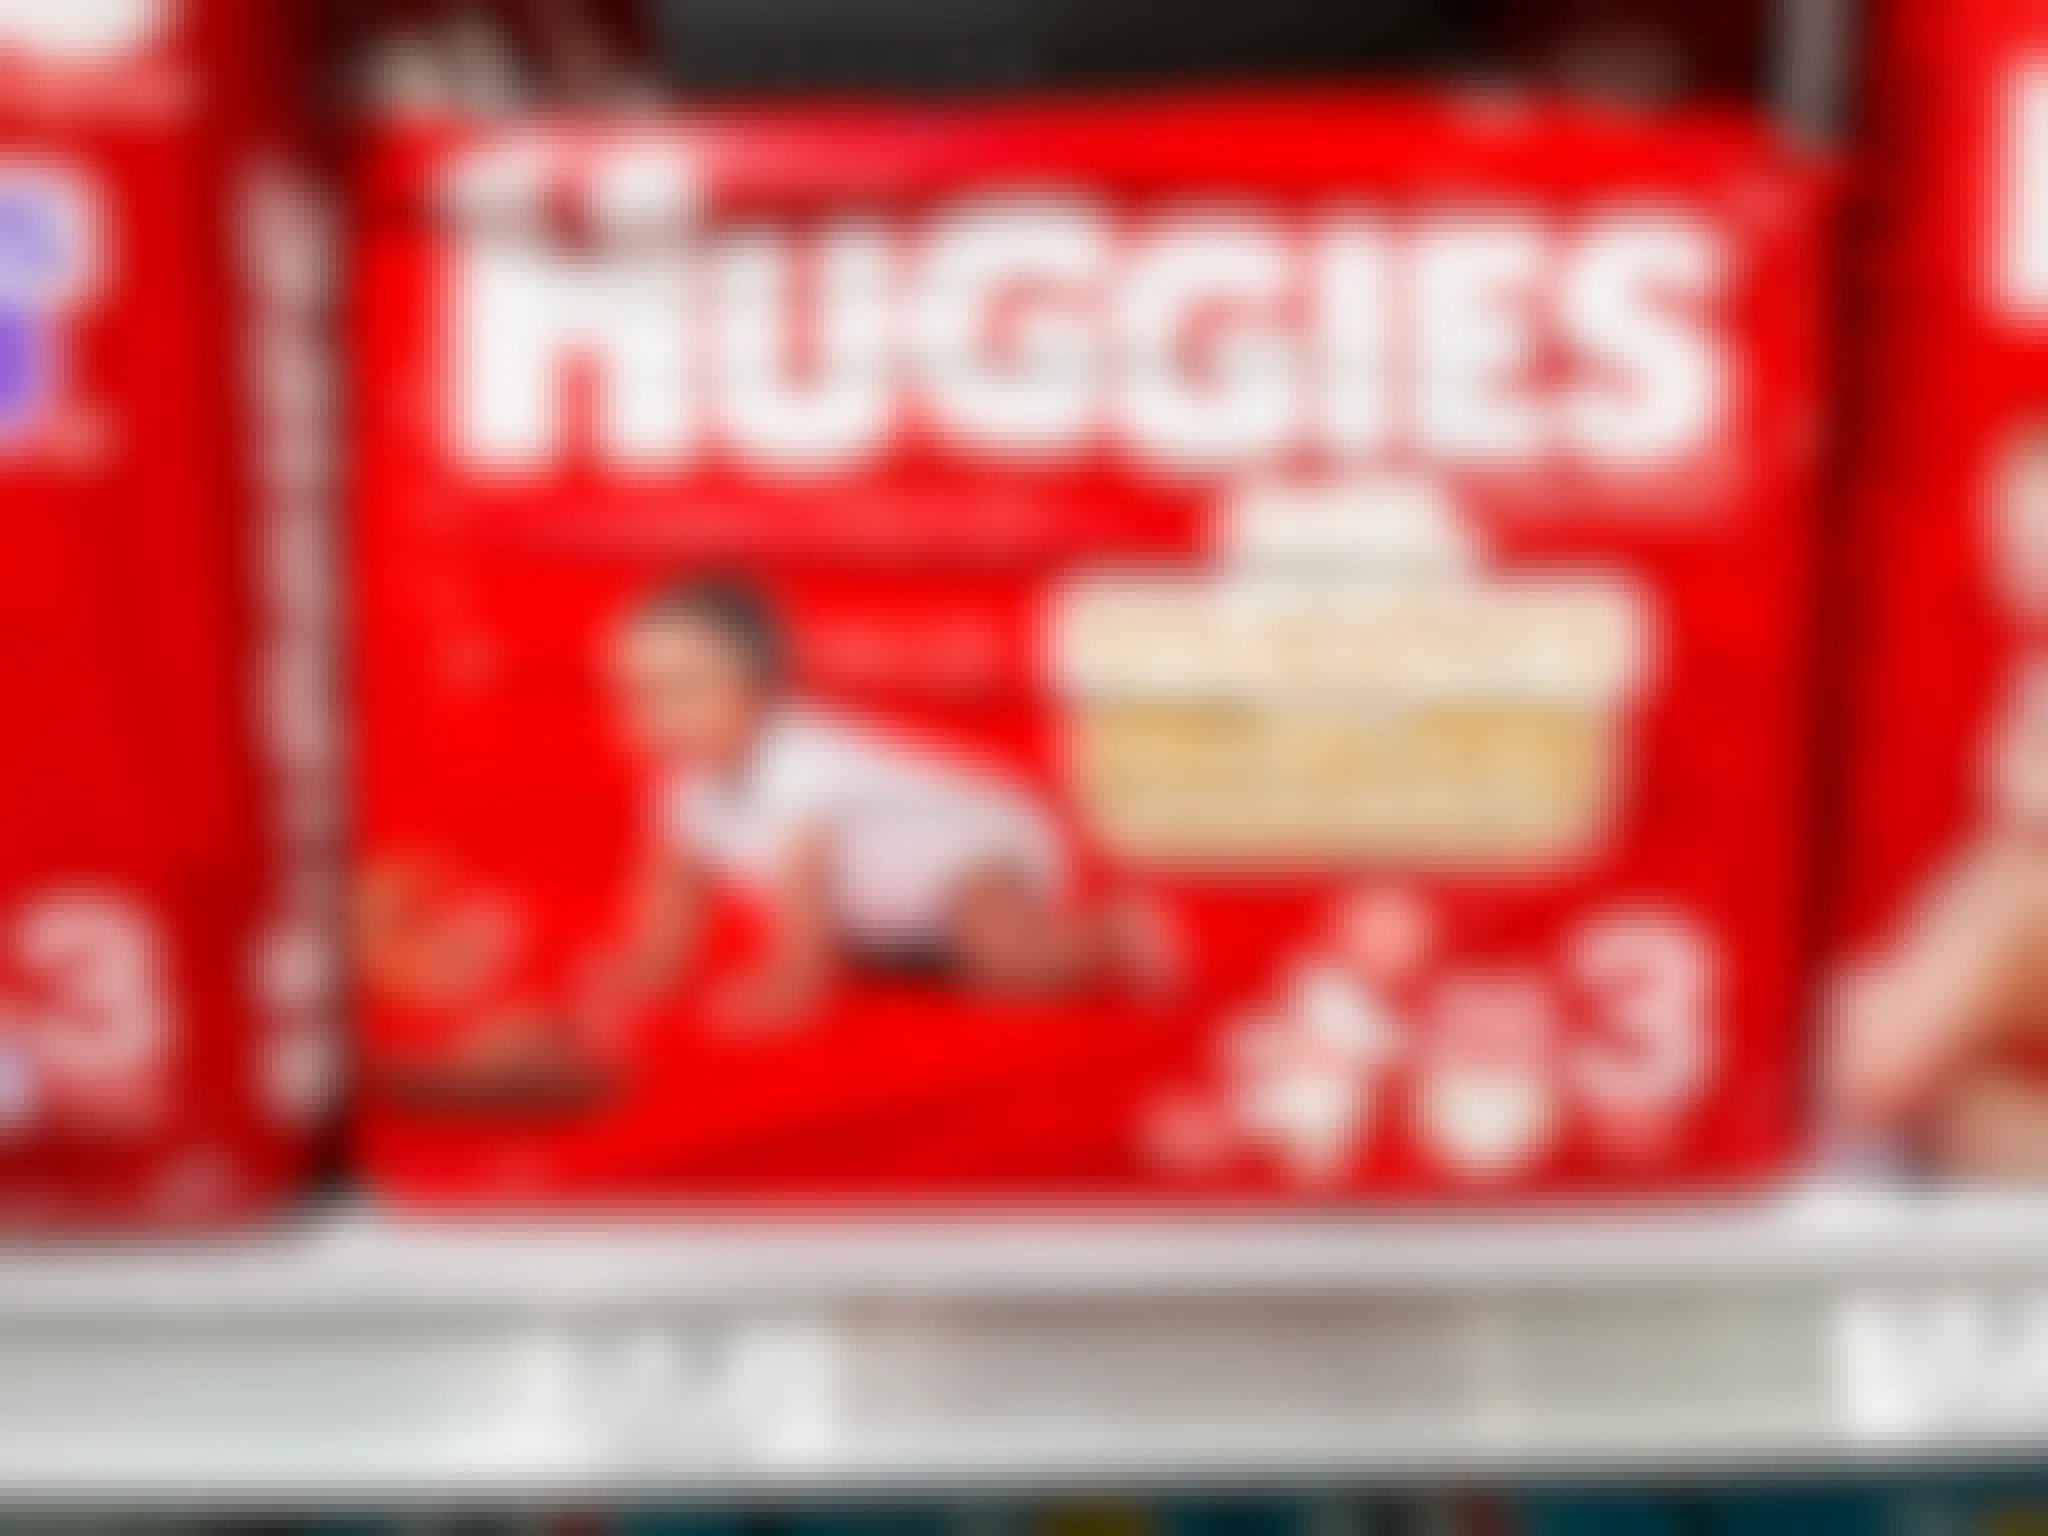 A pack of Huggies Little Snugglers diapers on a store shelf.